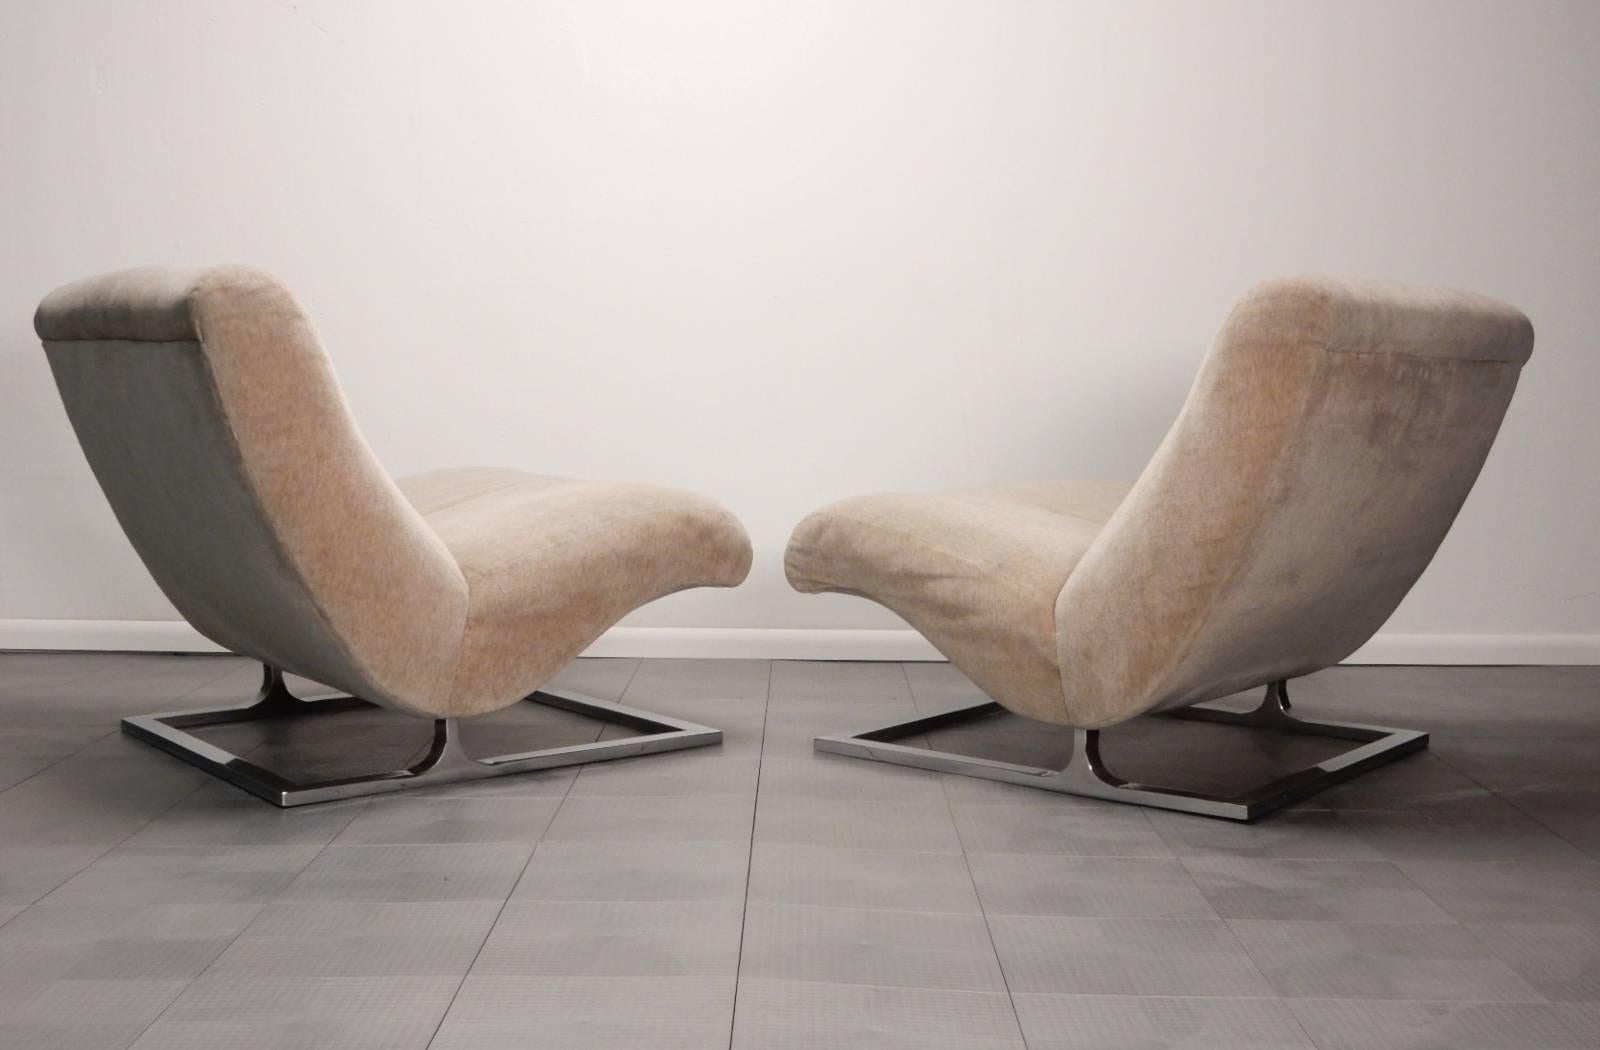 Pair of low Milo Baughman design floating lounge chairs.
Plush comfy scoop seating with chrome flat bar base.
These chairs are solid. Original upholstery shows some wear.